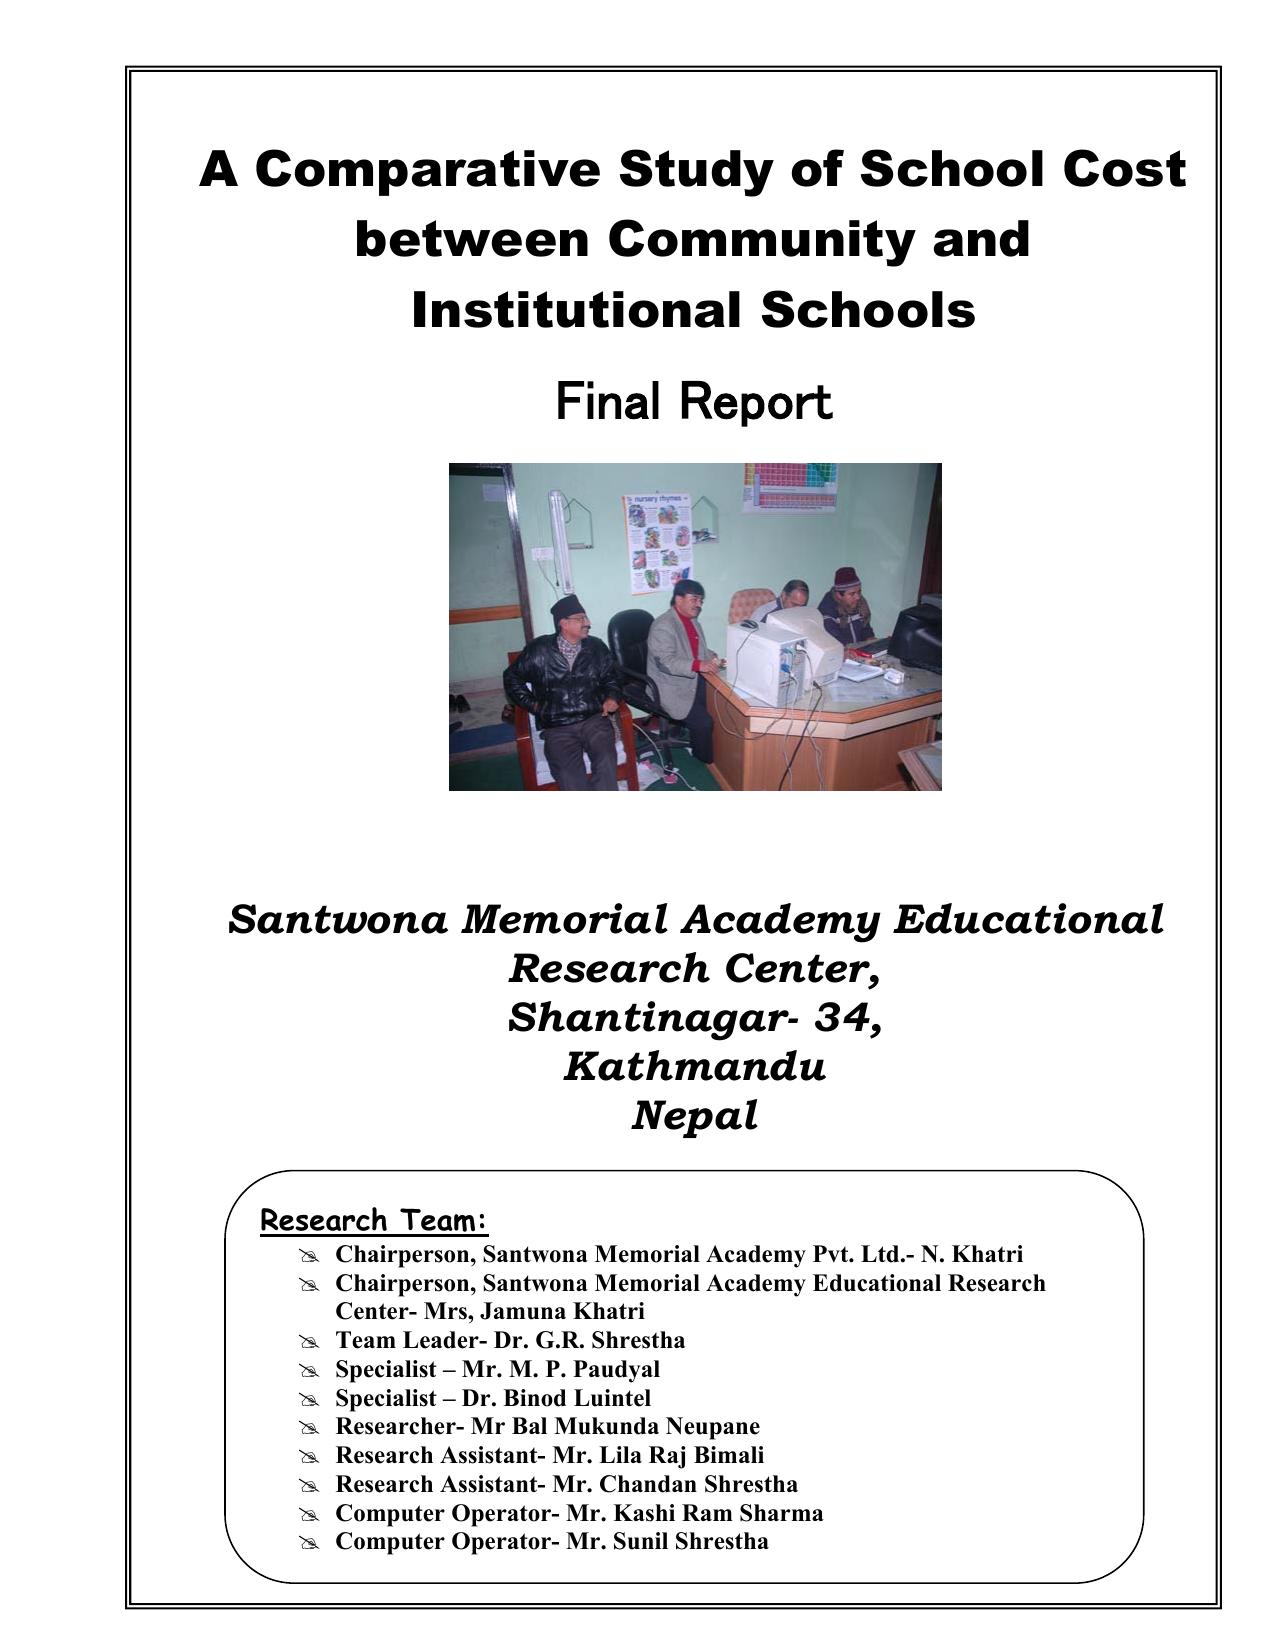 Comparative Study of School Cost between Community and Institutional Schools